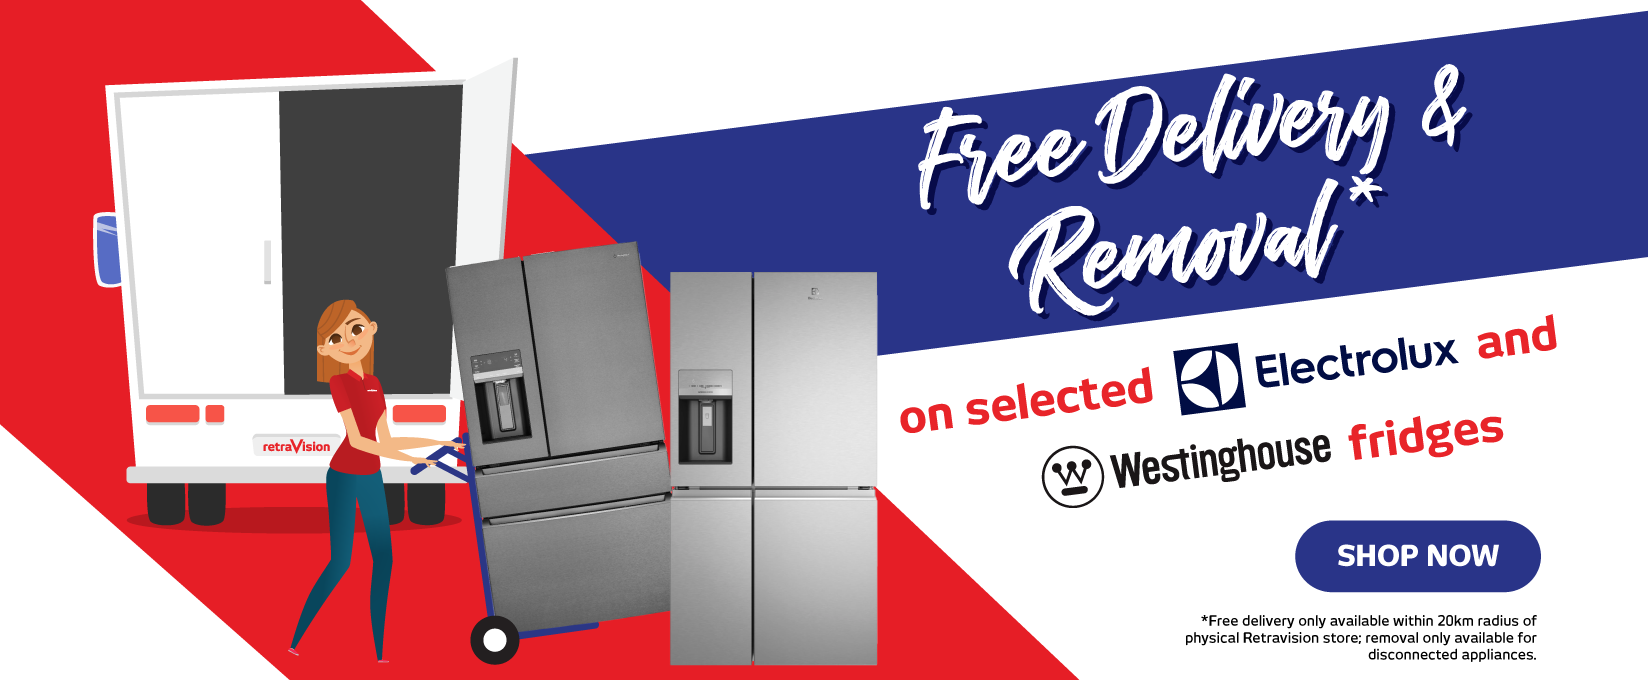 Free Delivery & Removal With Selected Electrolux & Westinghouse Fridges at Retravision